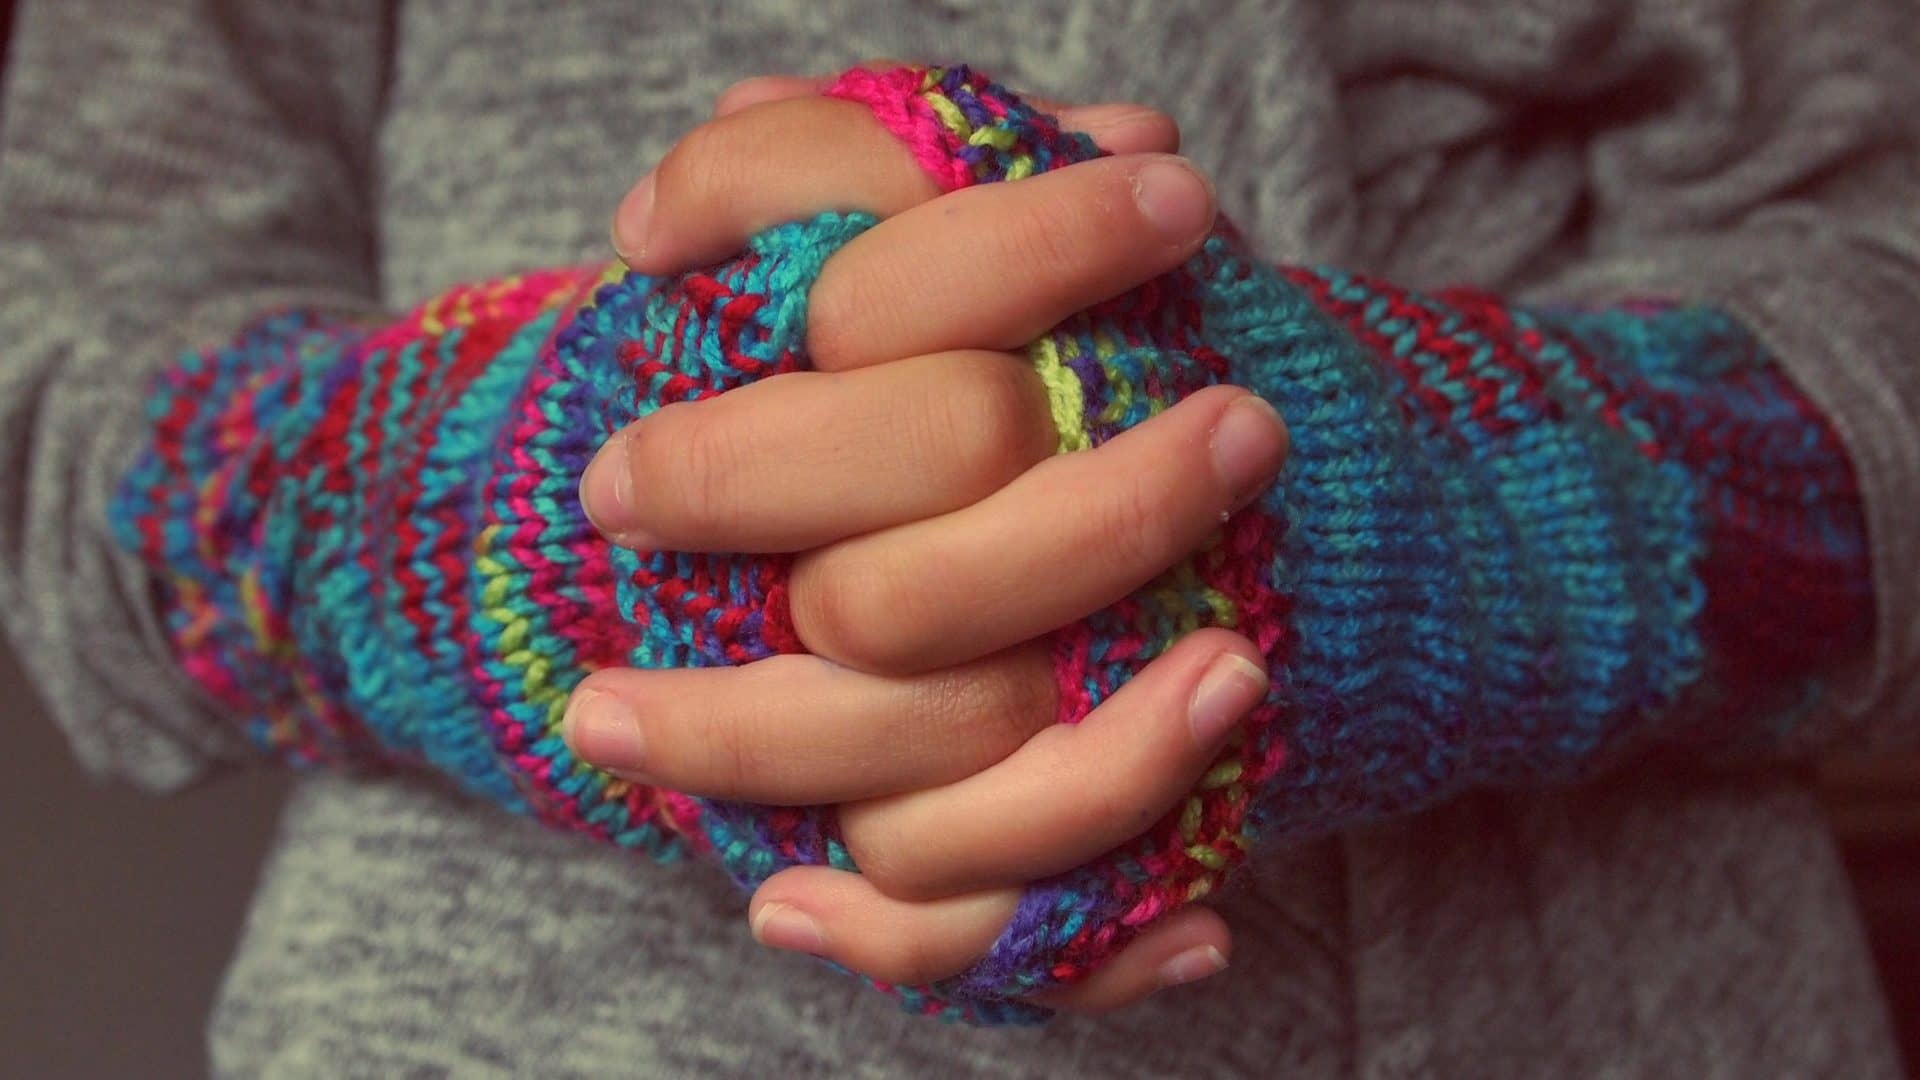 Image: Woven Hands Wearing Knit Gloves like the knitting projects Madame Tricot uses to help heal trauma with patients